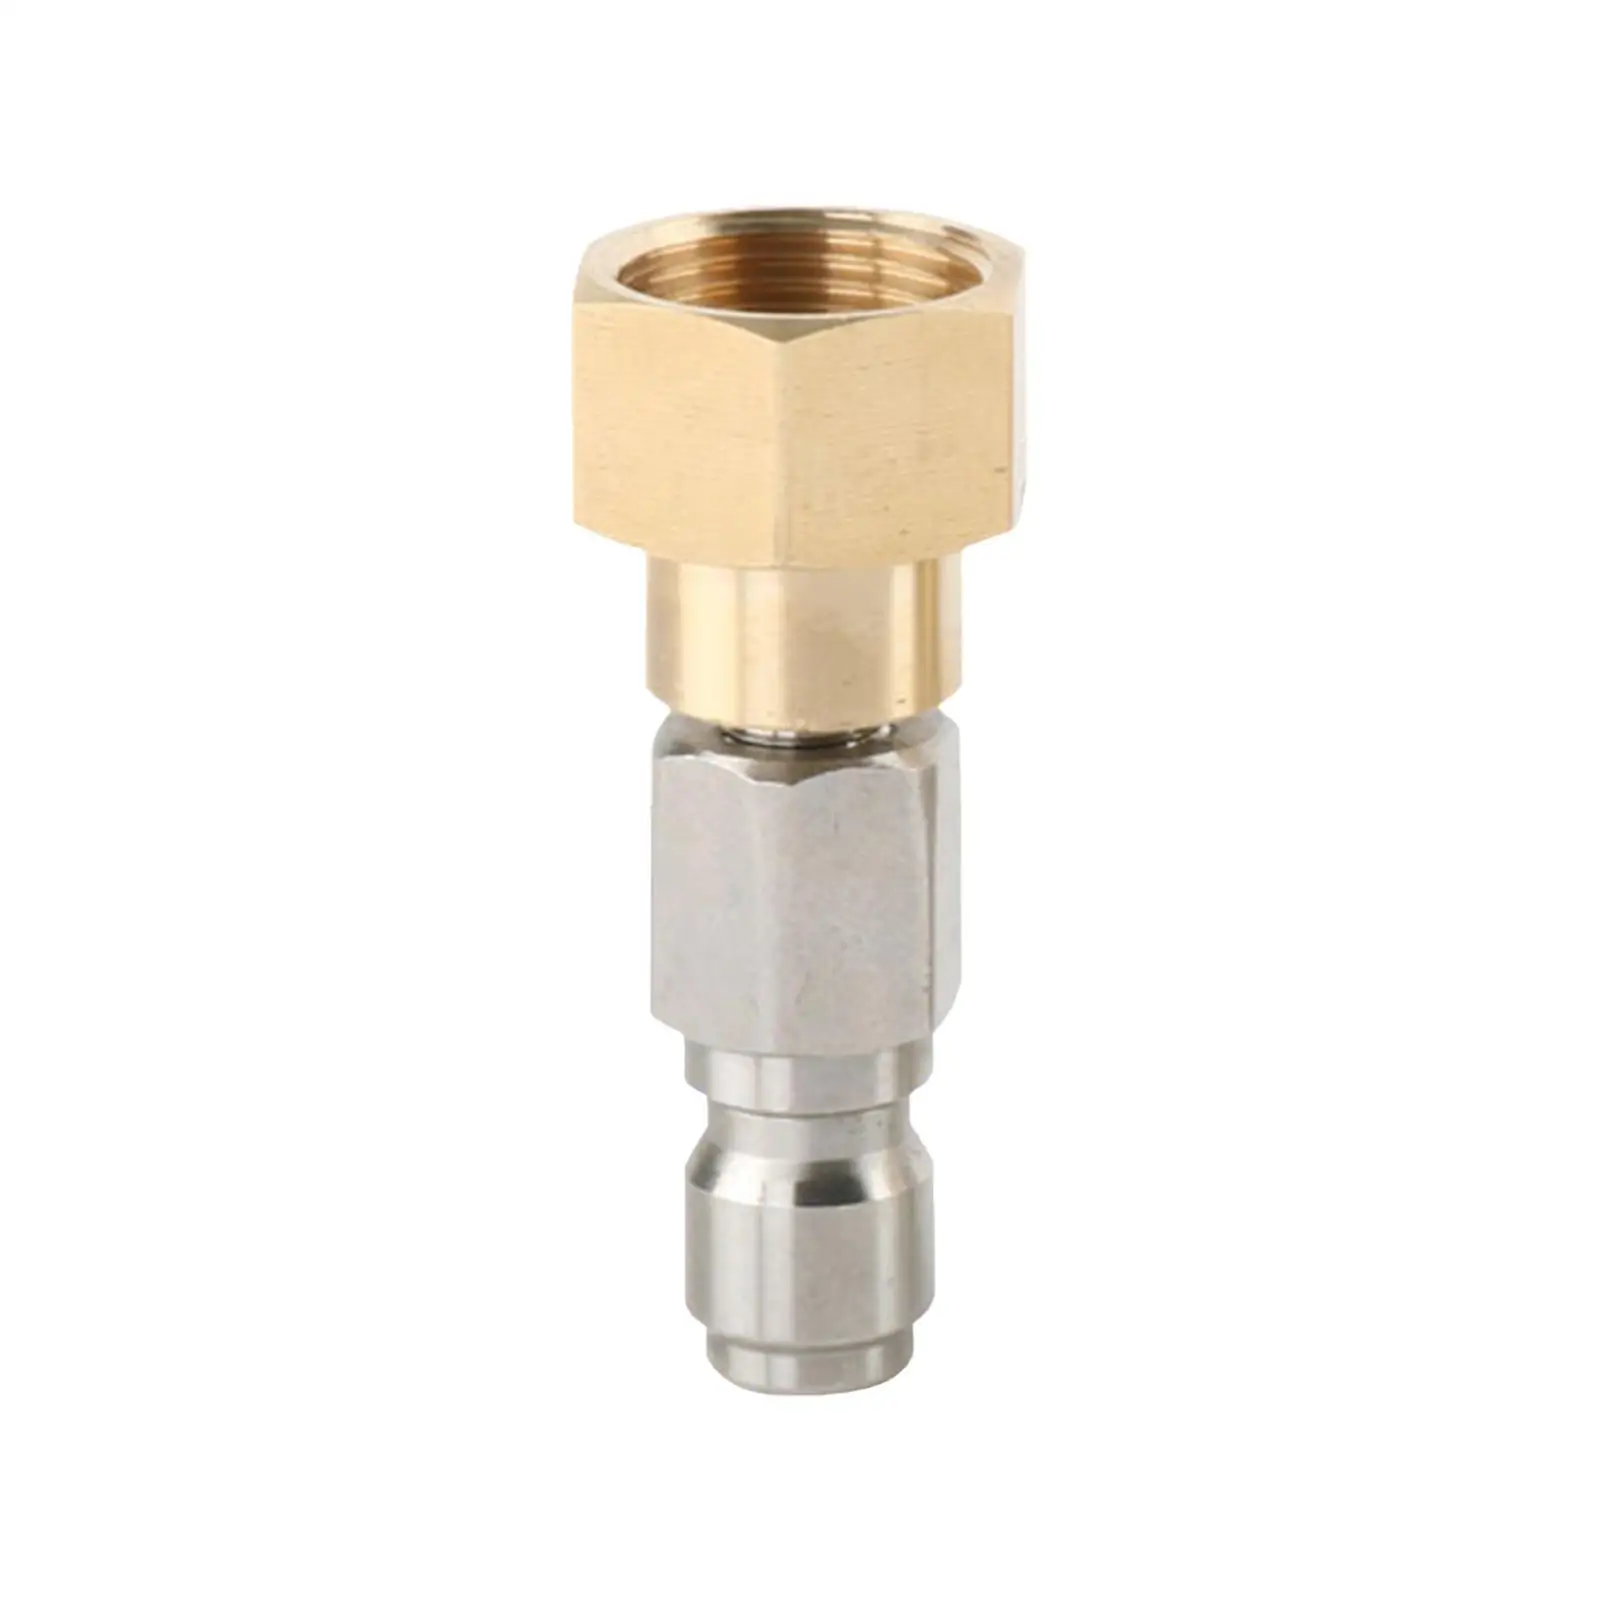 Thread Adapter Connector M22 Female M22 Steel Metric Pipe Fittings Water Hose Adapter for Washer Garden Ground Water Pipe